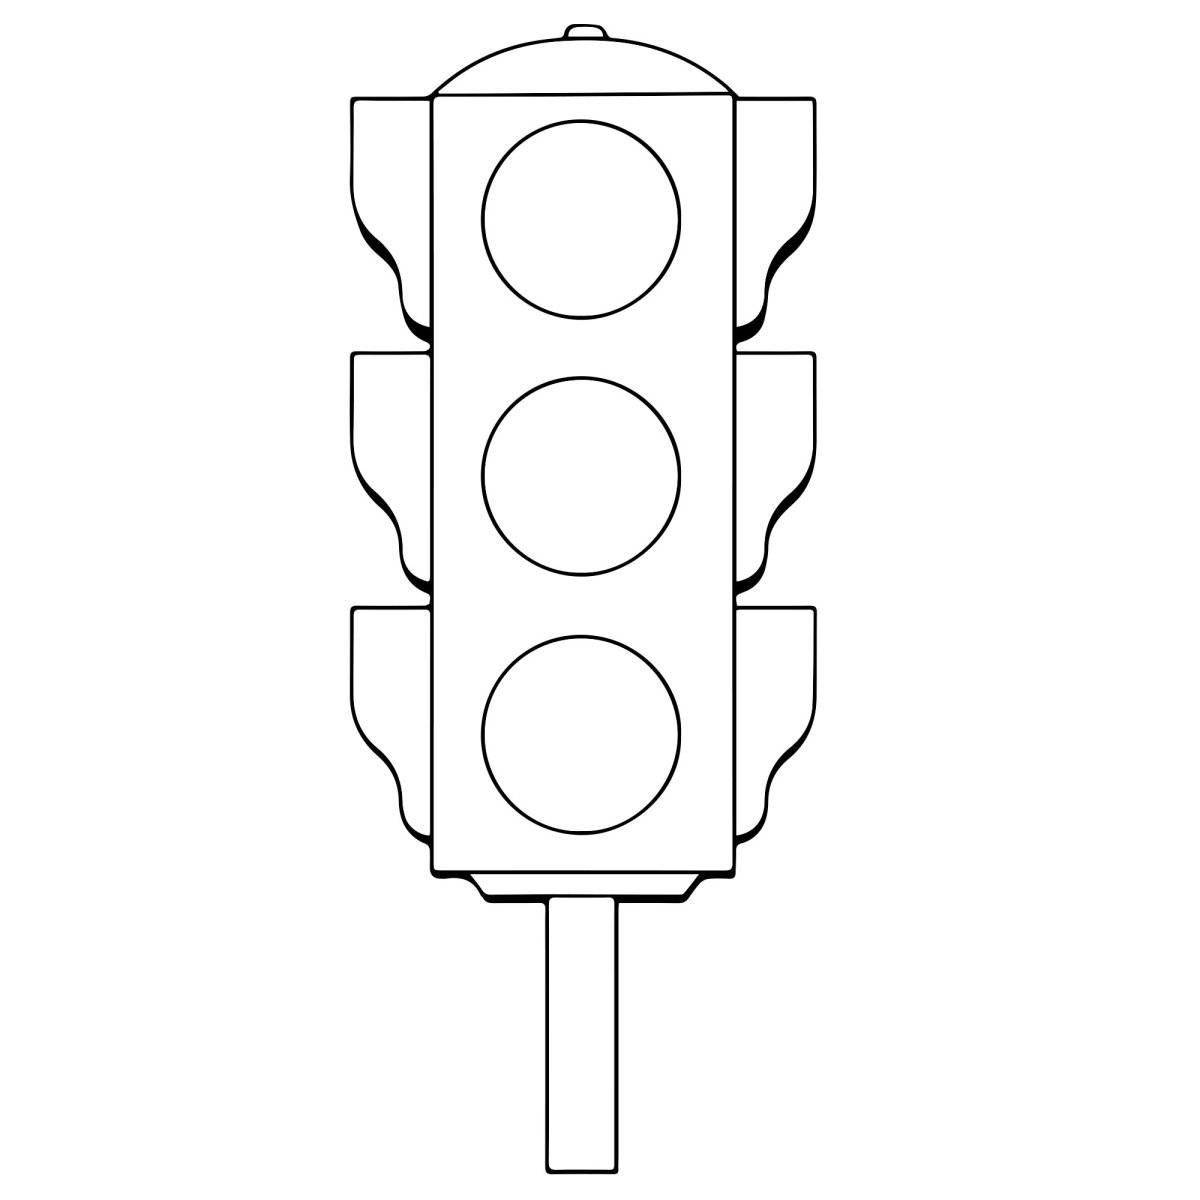 A fascinating traffic light with a siren